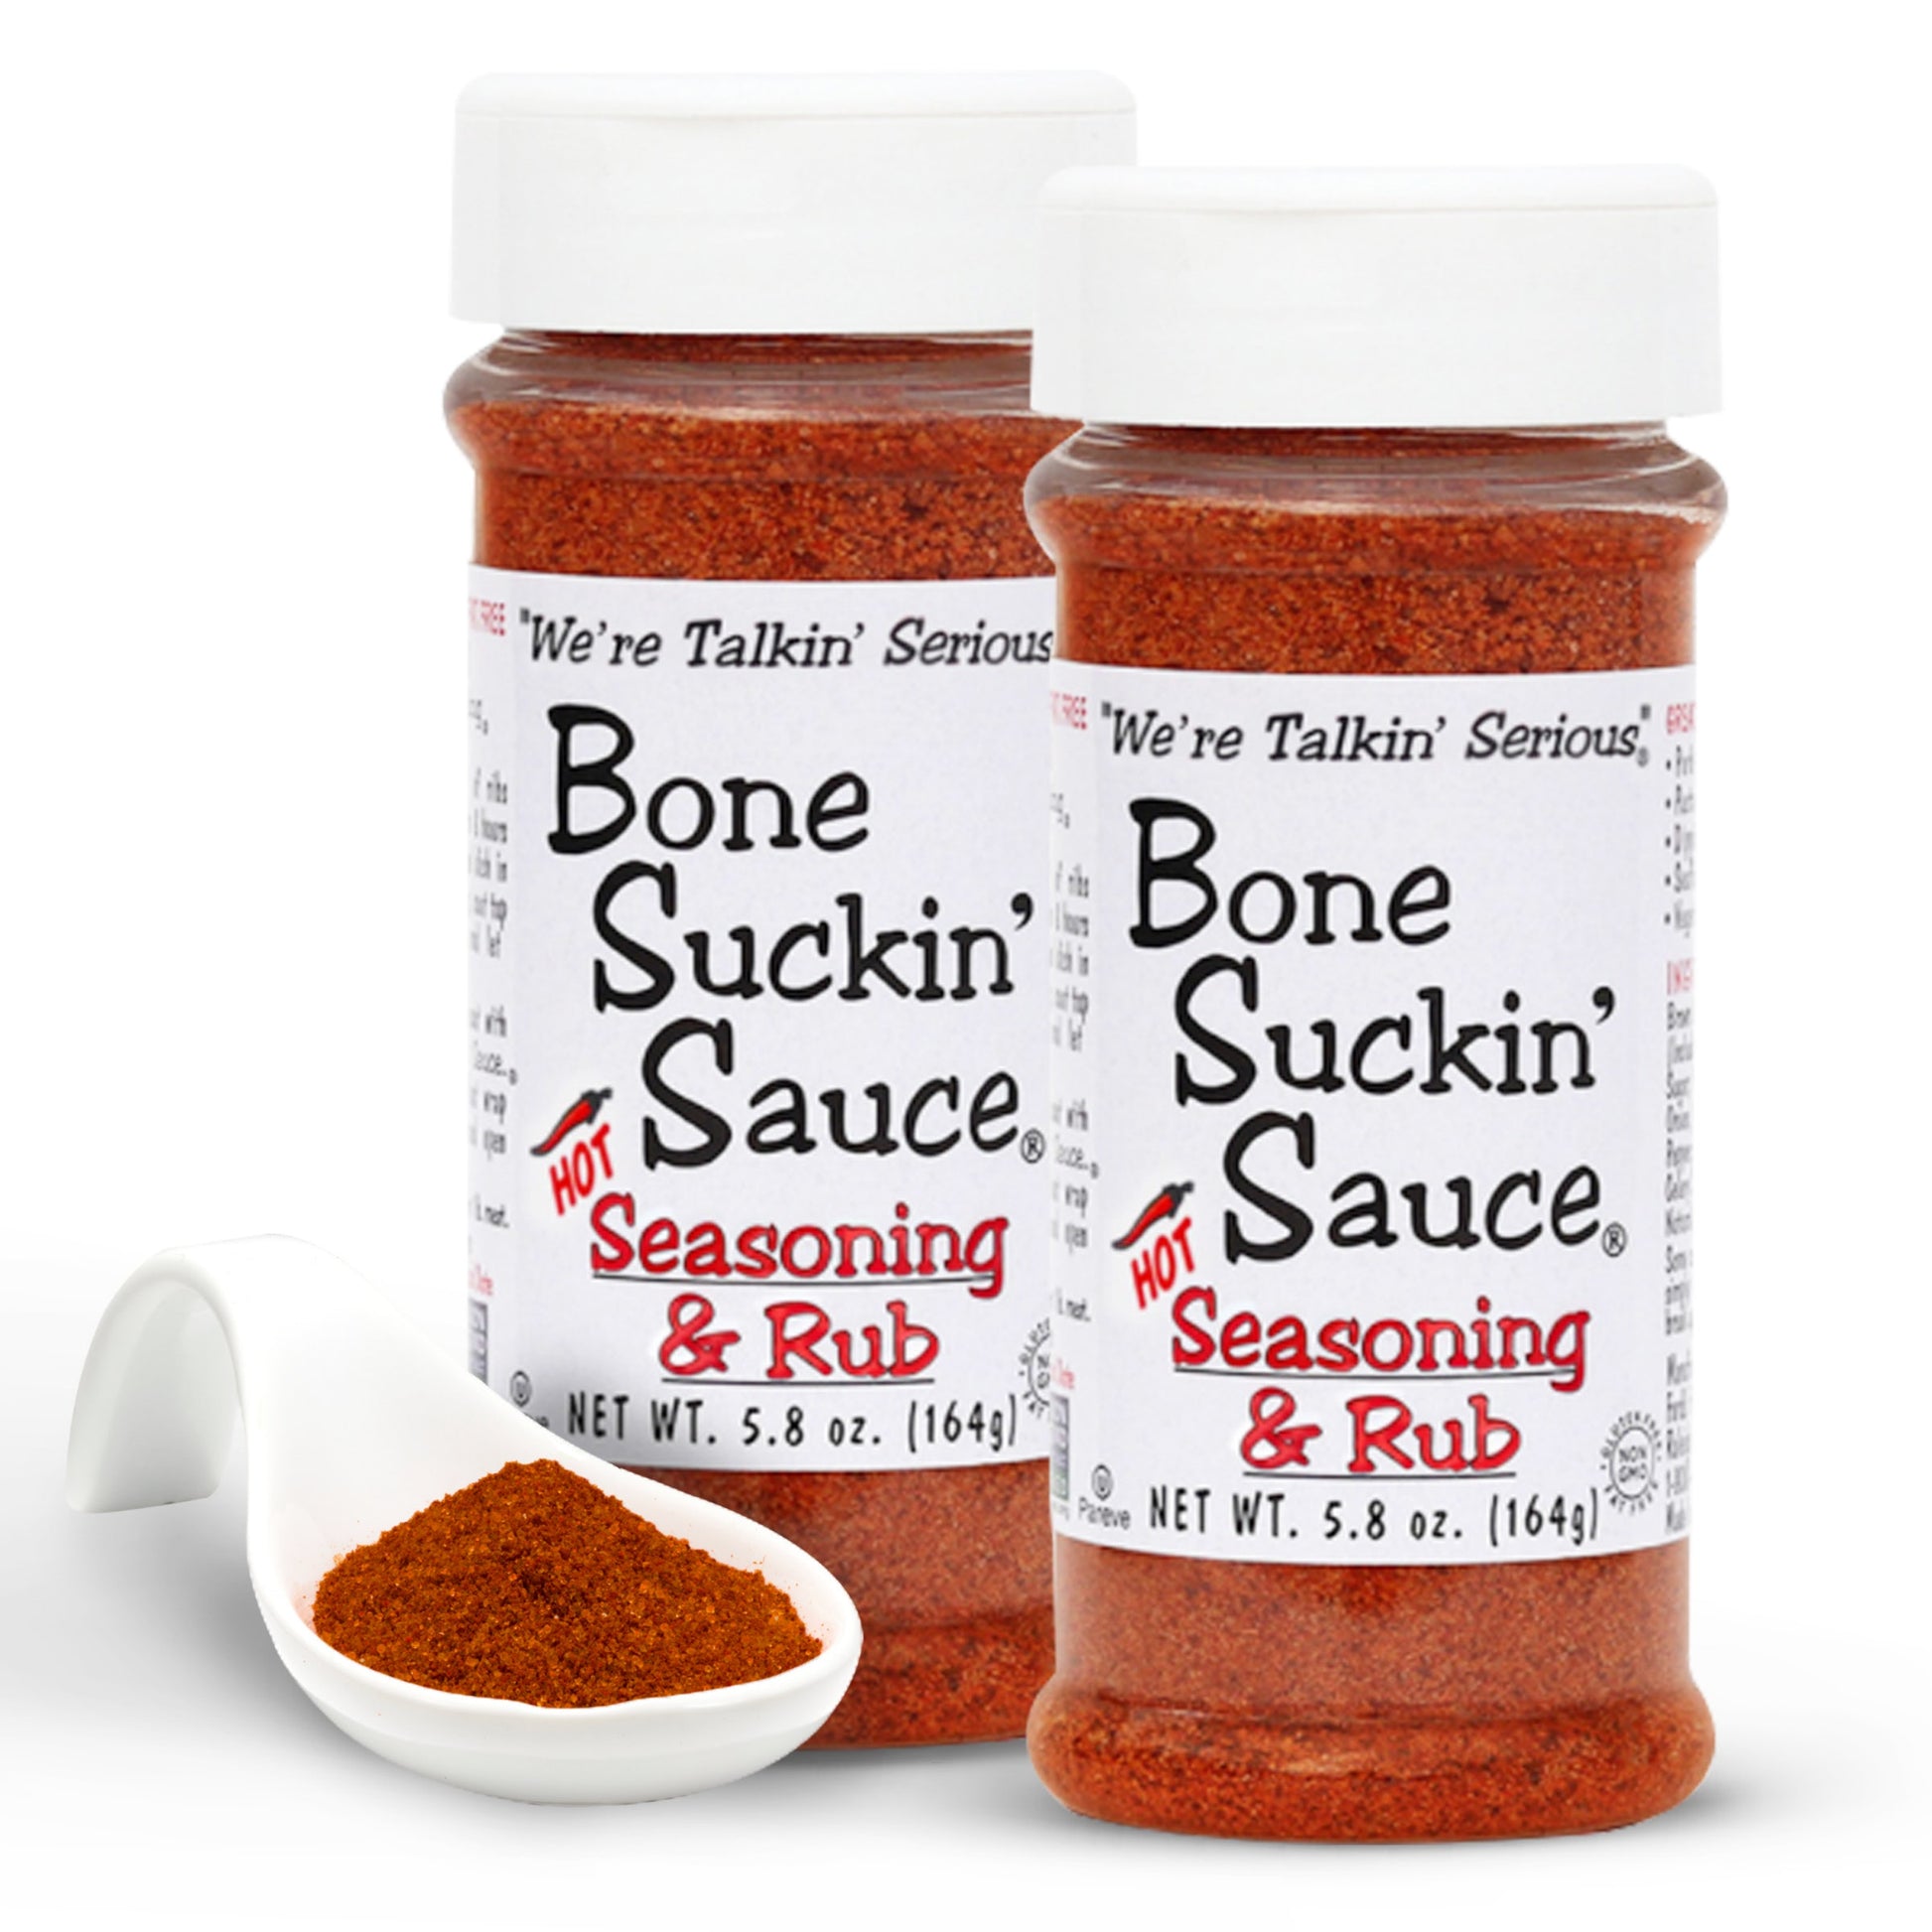 Bone Suckin’® Hot Seasoning & Rub, 5.8 oz. A cayenne kick is the perfect addition to the proprietary blend of brown sugar, paprika, garlic and spices in the original. This perfect combination of spicy, salty and sweet brings just the right amount of heat to this versatile product. Everyone can enjoy that same great flavor with a little extra spice. 2 pack